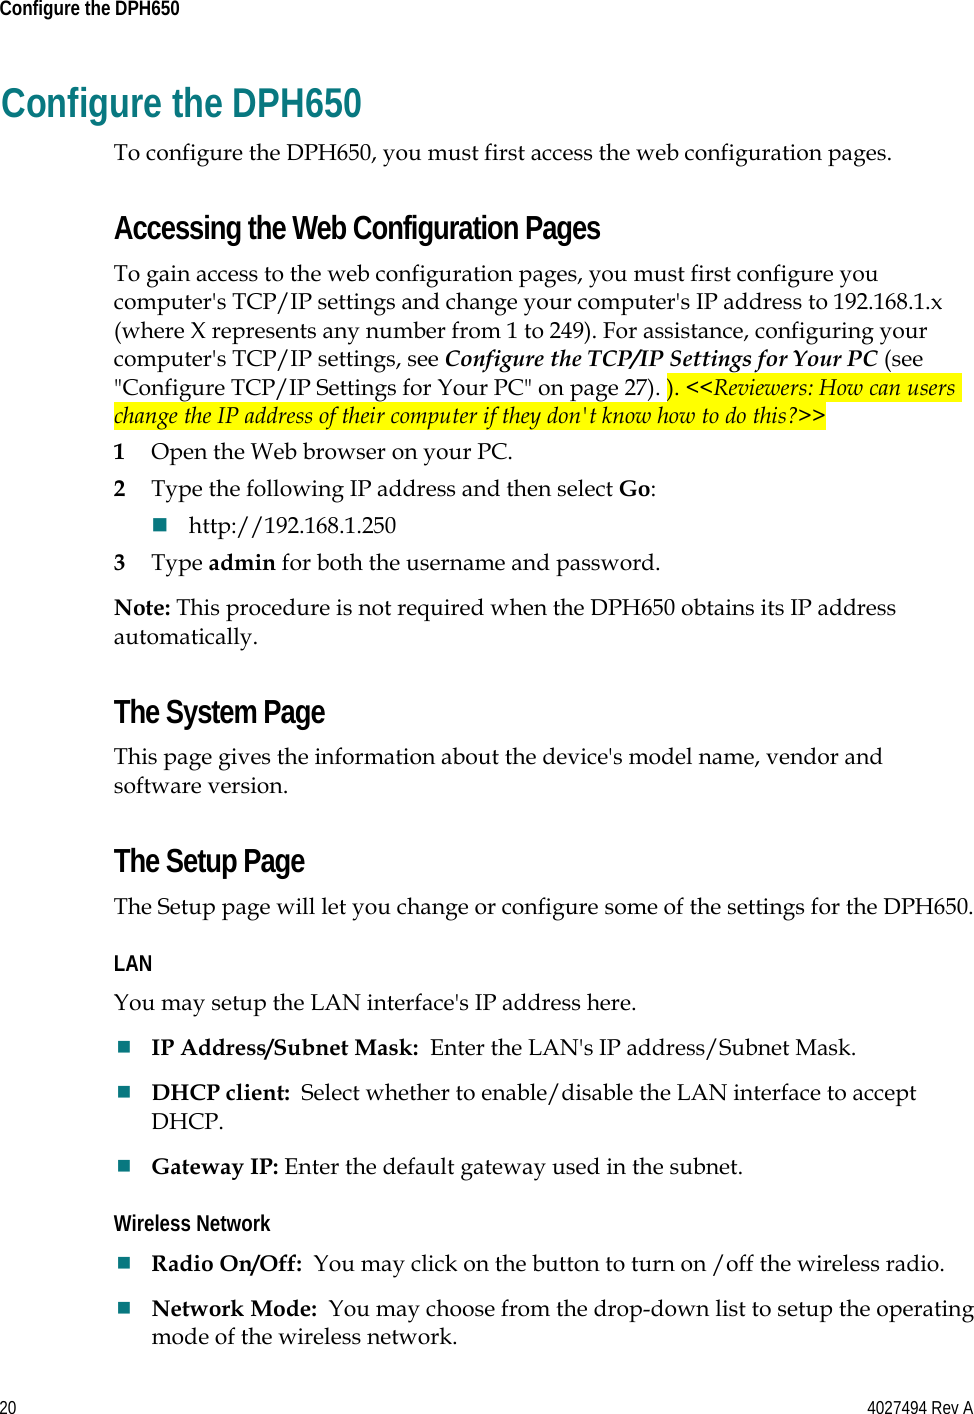 20    4027494 Rev A  Configure the DPH650  Configure the DPH650 To configure the DPH650, you must first access the web configuration pages.   Accessing the Web Configuration Pages To gain access to the web configuration pages, you must first configure you computer&apos;s TCP/IP settings and change your computer&apos;s IP address to 192.168.1.x  (where X represents any number from 1 to 249). For assistance, configuring your computer&apos;s TCP/IP settings, see Configure the TCP/IP Settings for Your PC (see &quot;Configure TCP/IP Settings for Your PC&quot; on page 27). ). &lt;&lt;Reviewers: How can users change the IP address of their computer if they don&apos;t know how to do this?&gt;&gt; 1 Open the Web browser on your PC. 2 Type the following IP address and then select Go:  http://192.168.1.250 3 Type admin for both the username and password. Note: This procedure is not required when the DPH650 obtains its IP address automatically. The System Page This page gives the information about the device&apos;s model name, vendor and software version. The Setup Page The Setup page will let you change or configure some of the settings for the DPH650. LAN You may setup the LAN interface&apos;s IP address here.  IP Address/Subnet Mask:  Enter the LAN&apos;s IP address/Subnet Mask.  DHCP client:  Select whether to enable/disable the LAN interface to accept DHCP.  Gateway IP: Enter the default gateway used in the subnet. Wireless Network  Radio On/Off:  You may click on the button to turn on /off the wireless radio.  Network Mode:  You may choose from the drop-down list to setup the operating mode of the wireless network. 